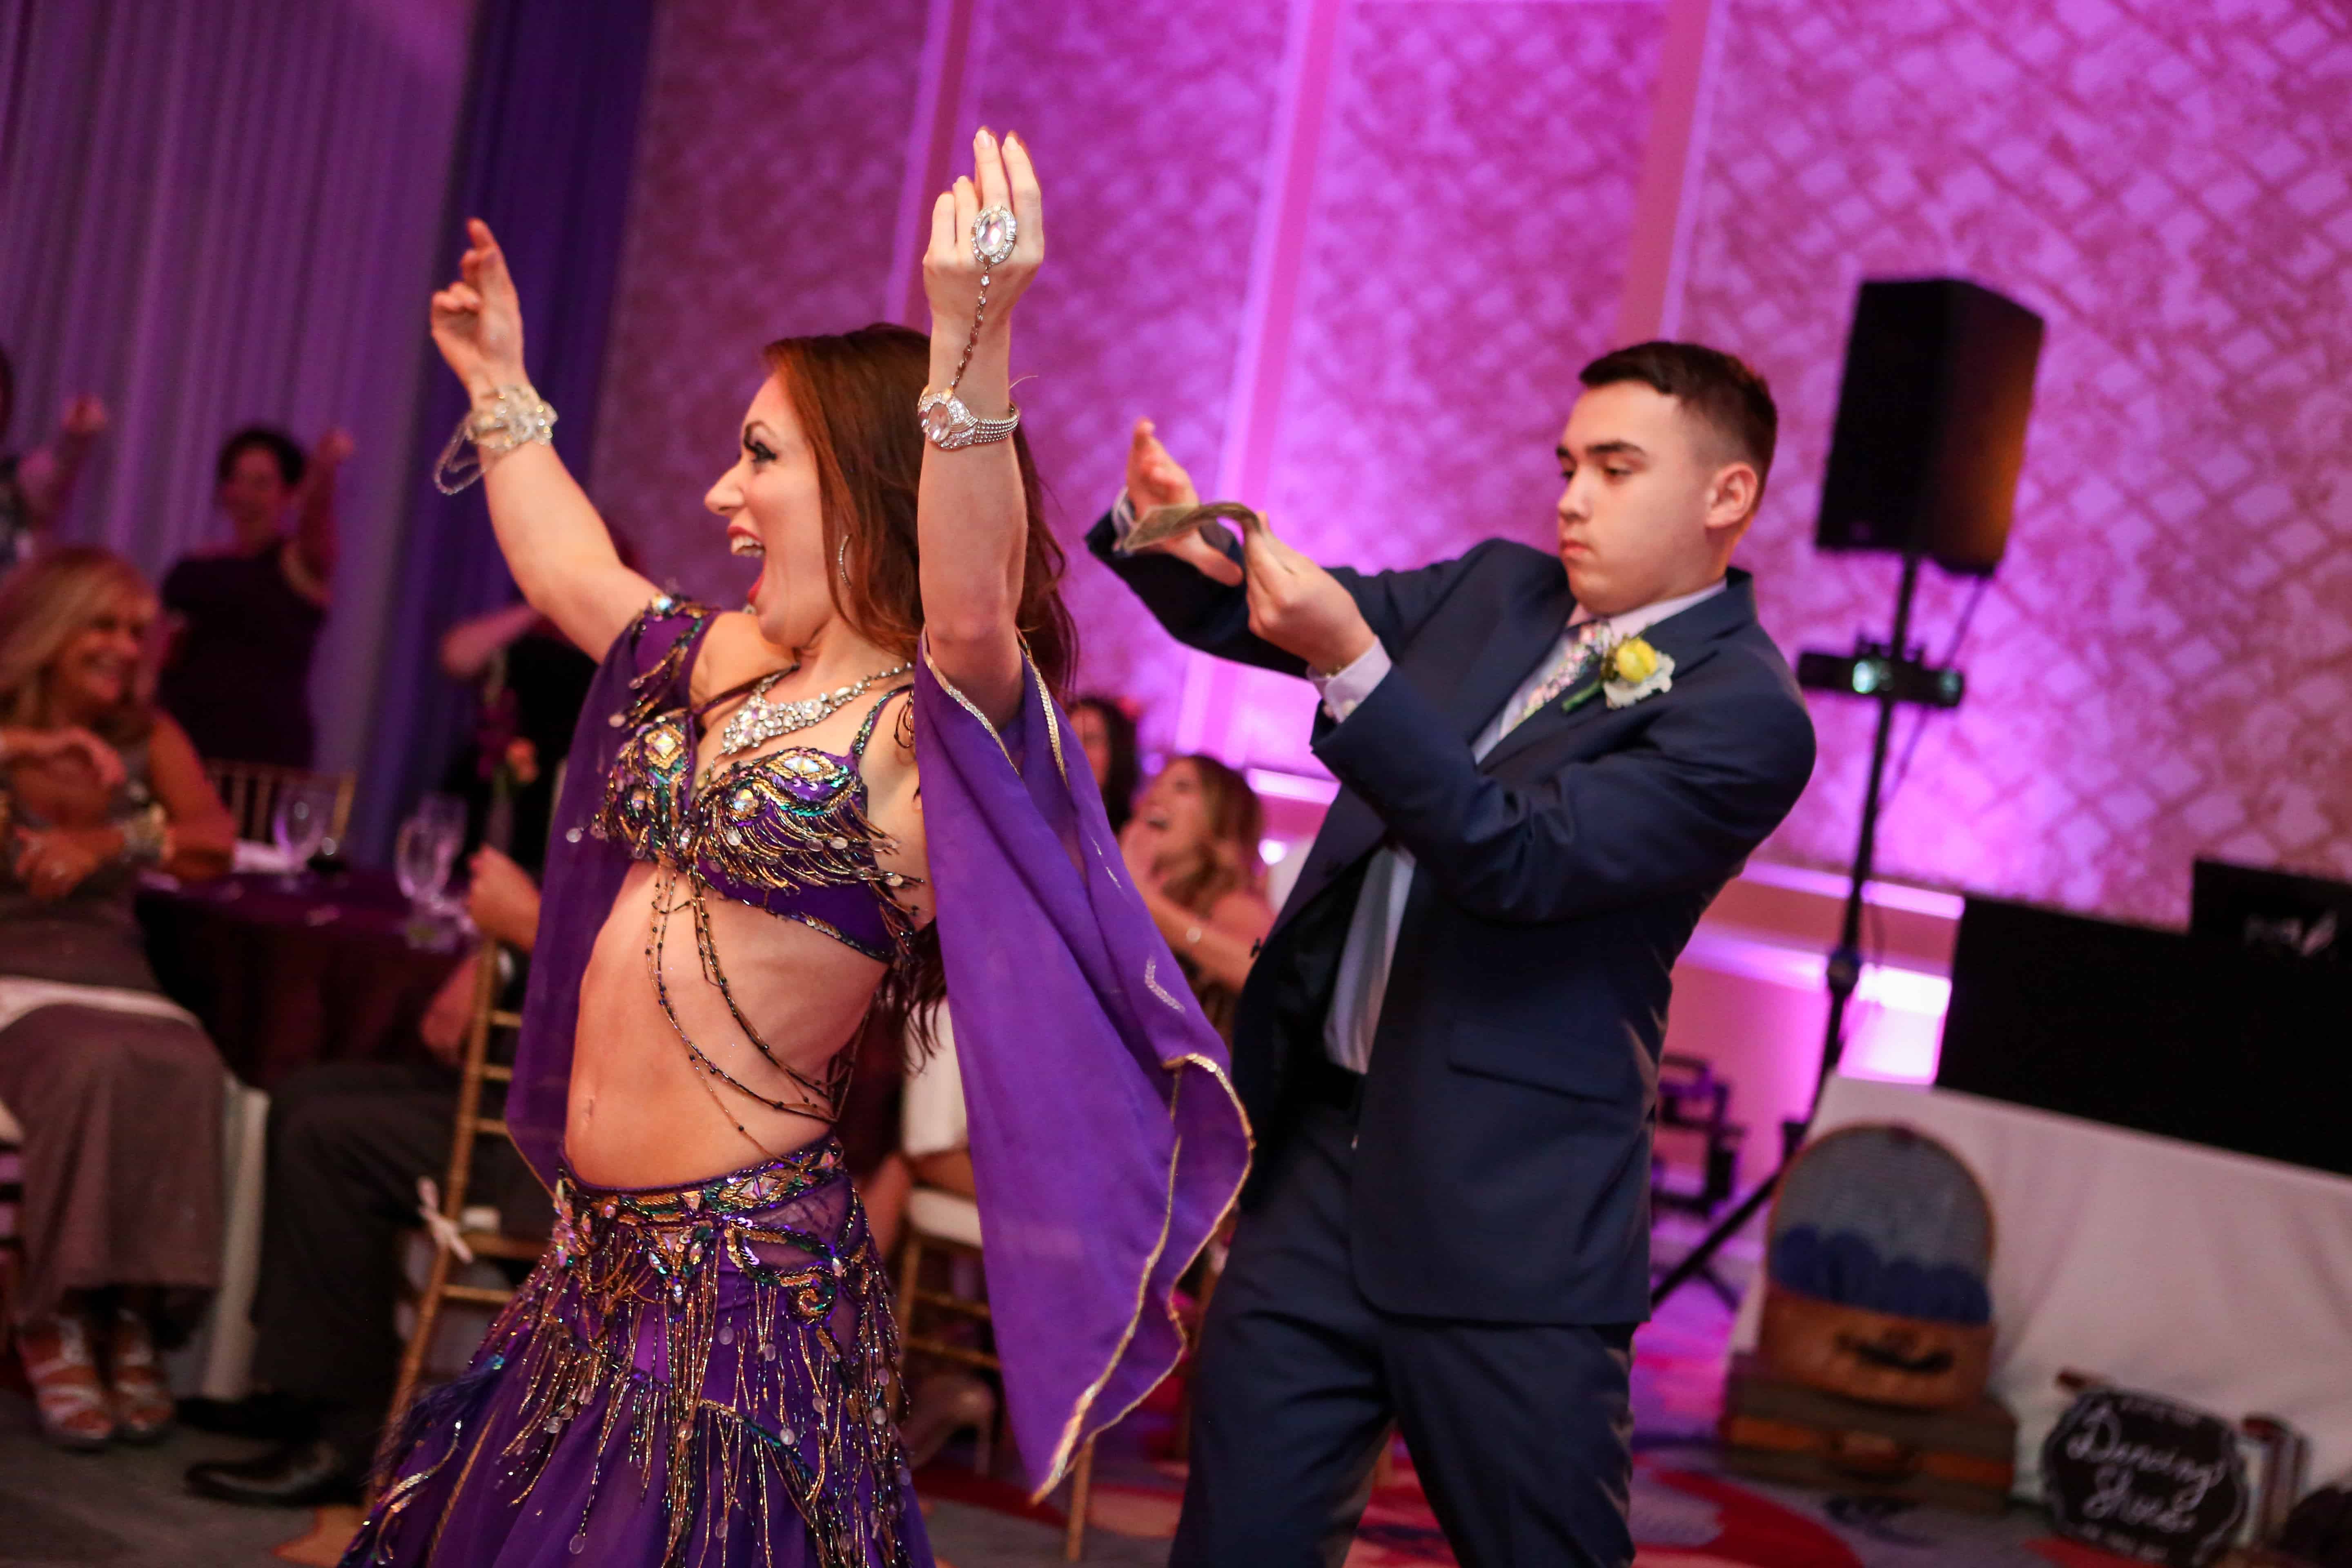 Carrara performs belly dance at an LGBT wedding at Omni Championsgate. Photo by LiveHappy Studio